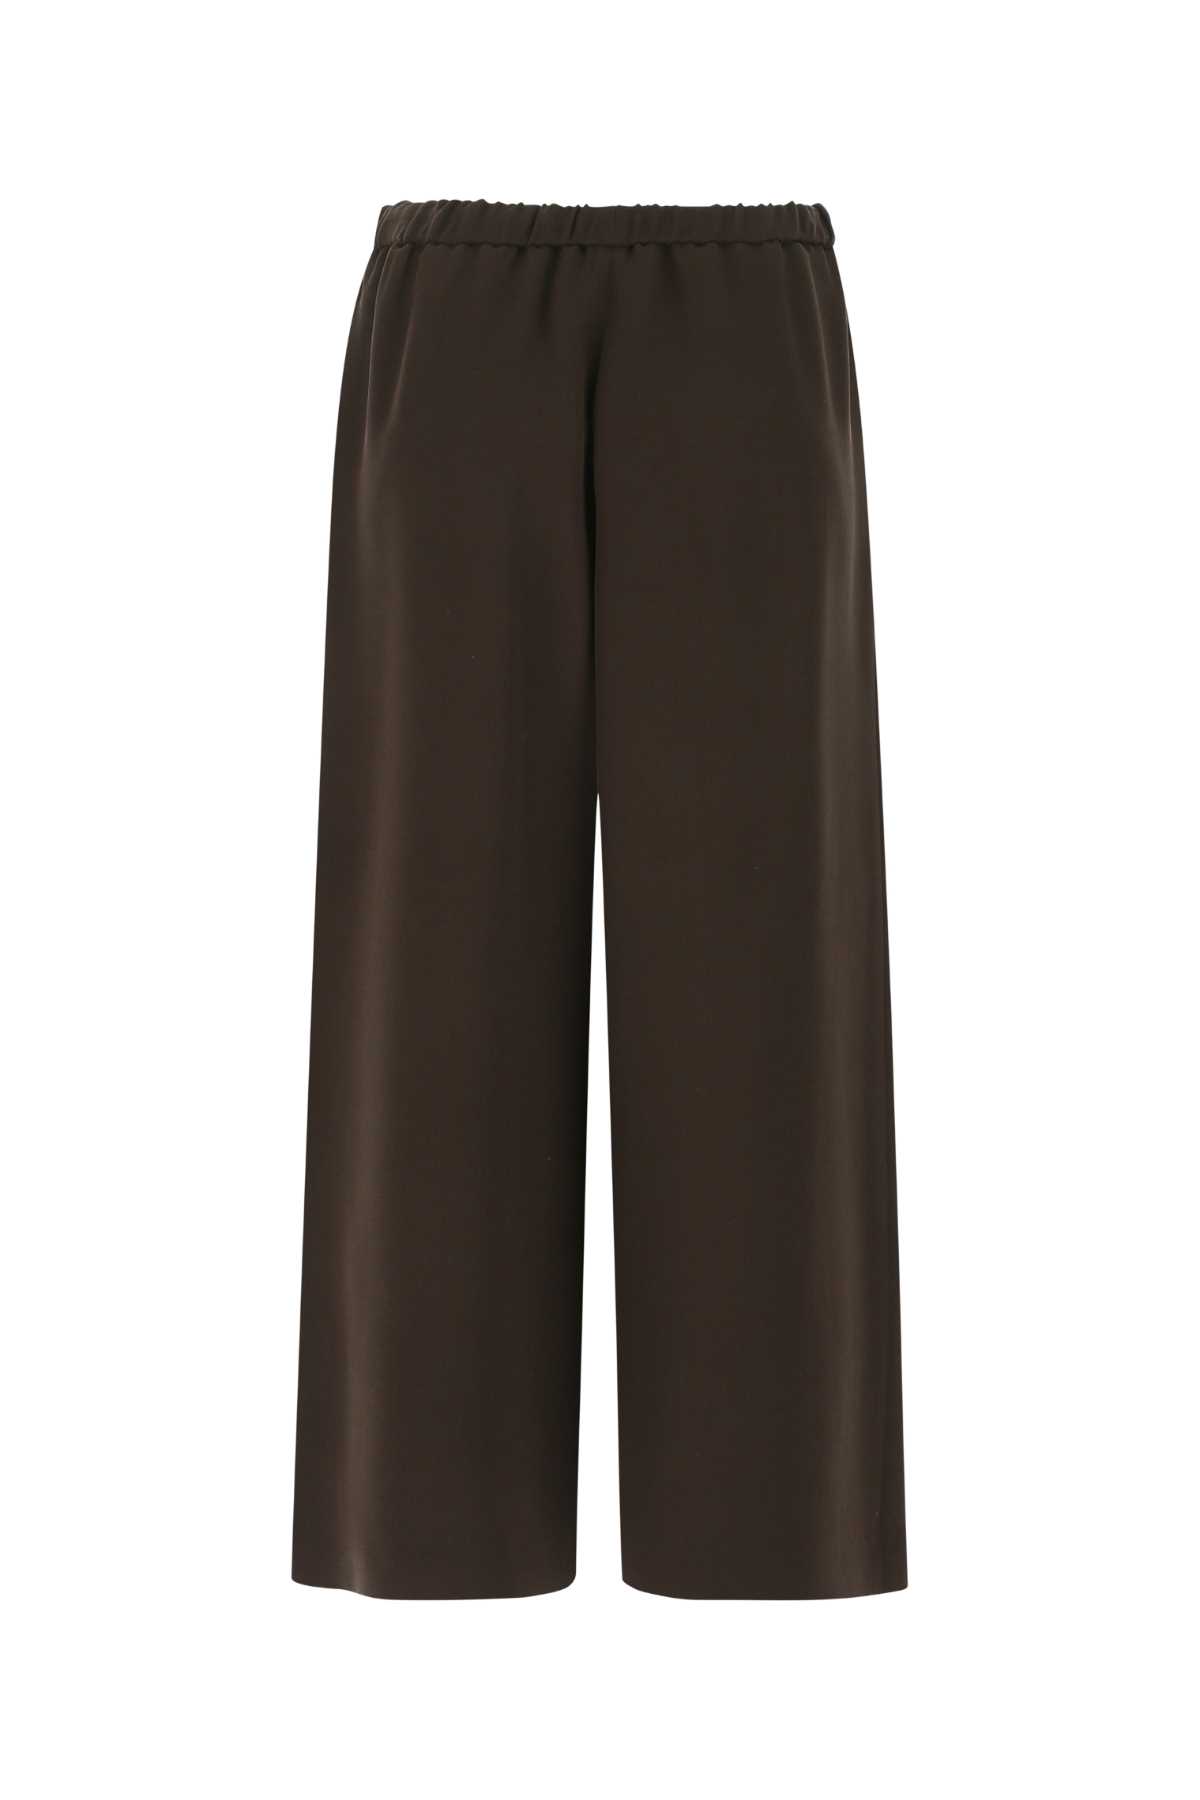 Shop Valentino Chocolate Crepe Culotte Pant In S65